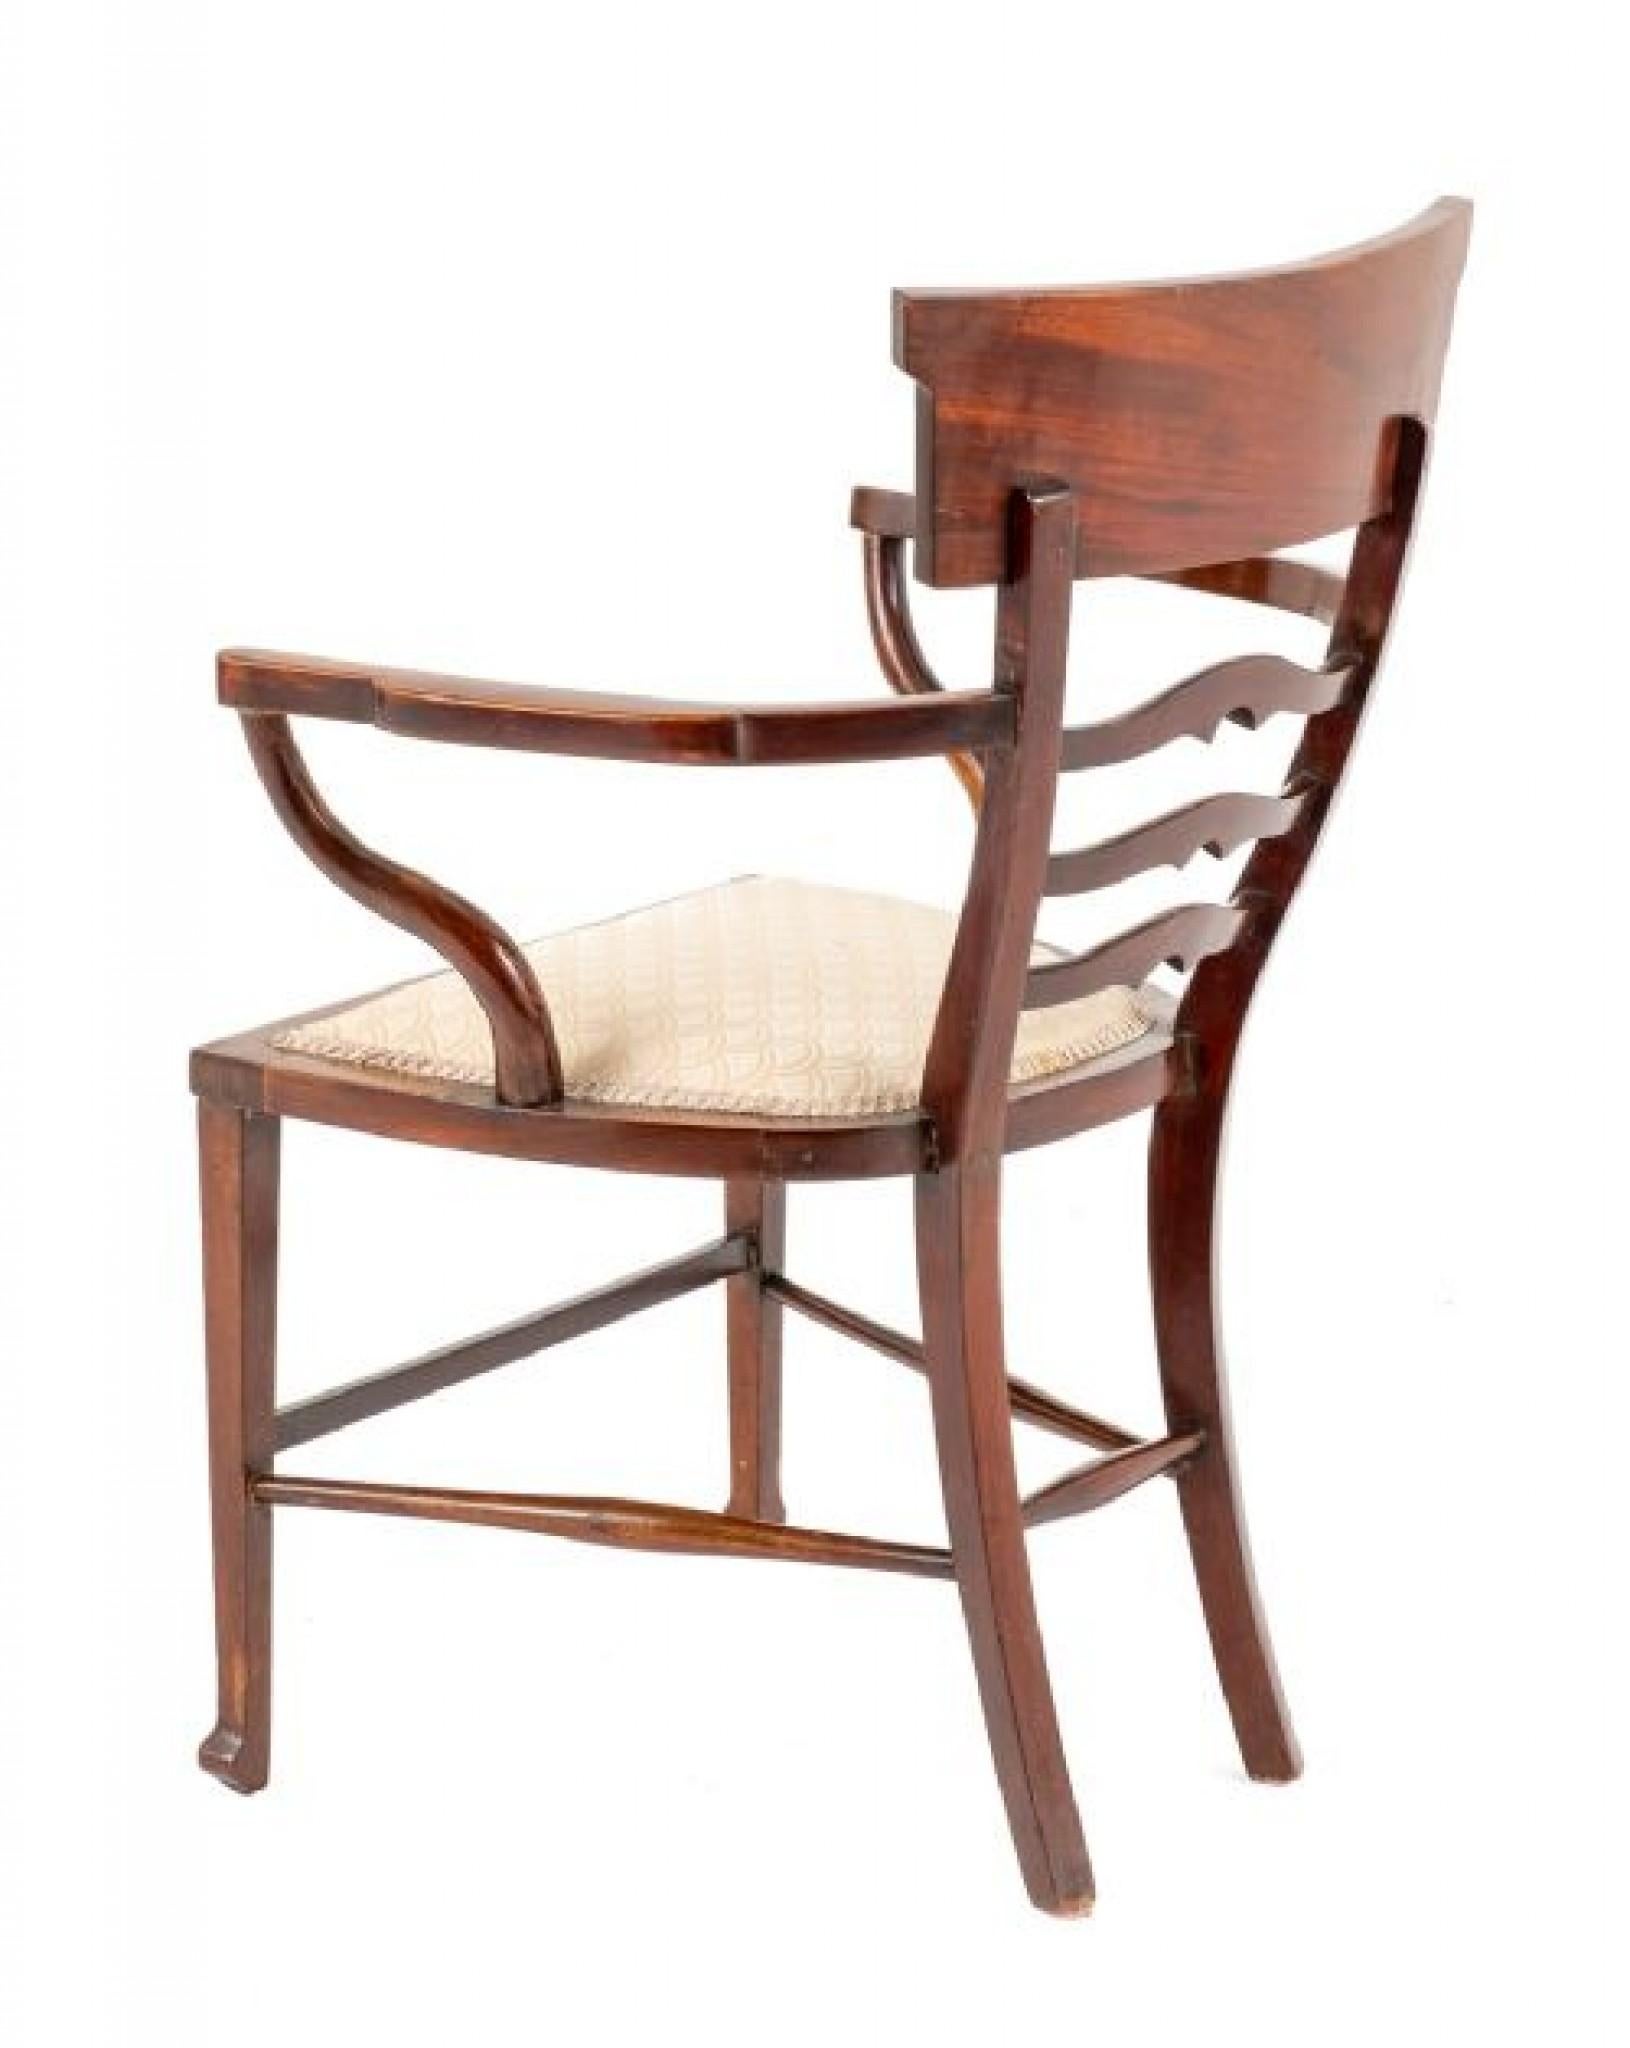 Late 19th Century Sheraton Arm Chair Revival 1890 Mahogany For Sale